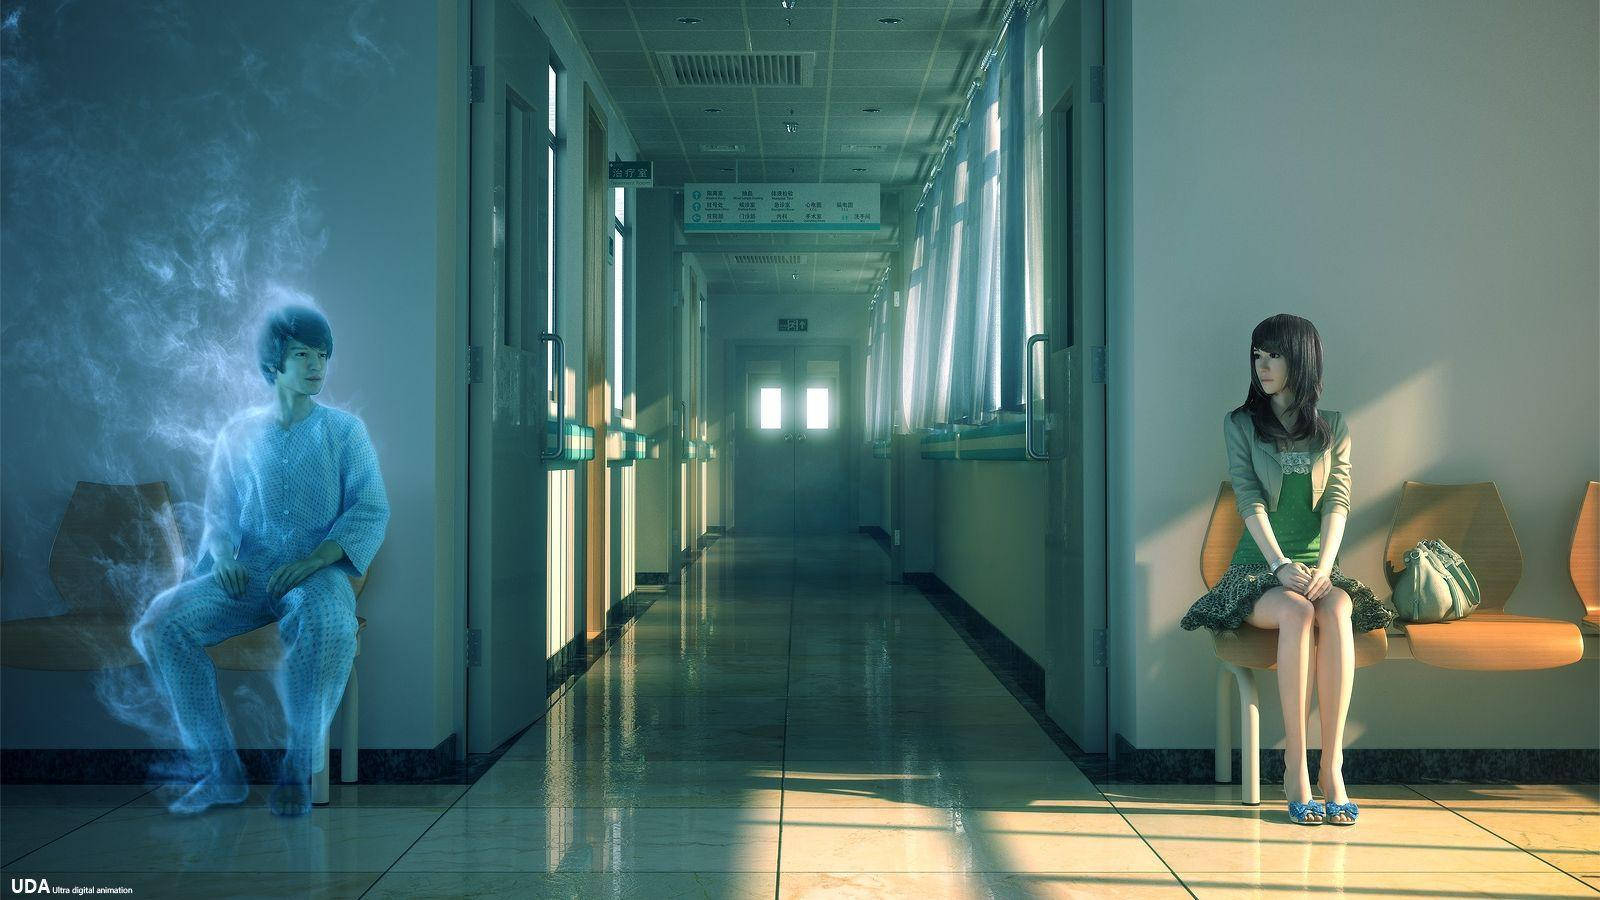 Ghost And Girl Hospital Hallway Wallpaper